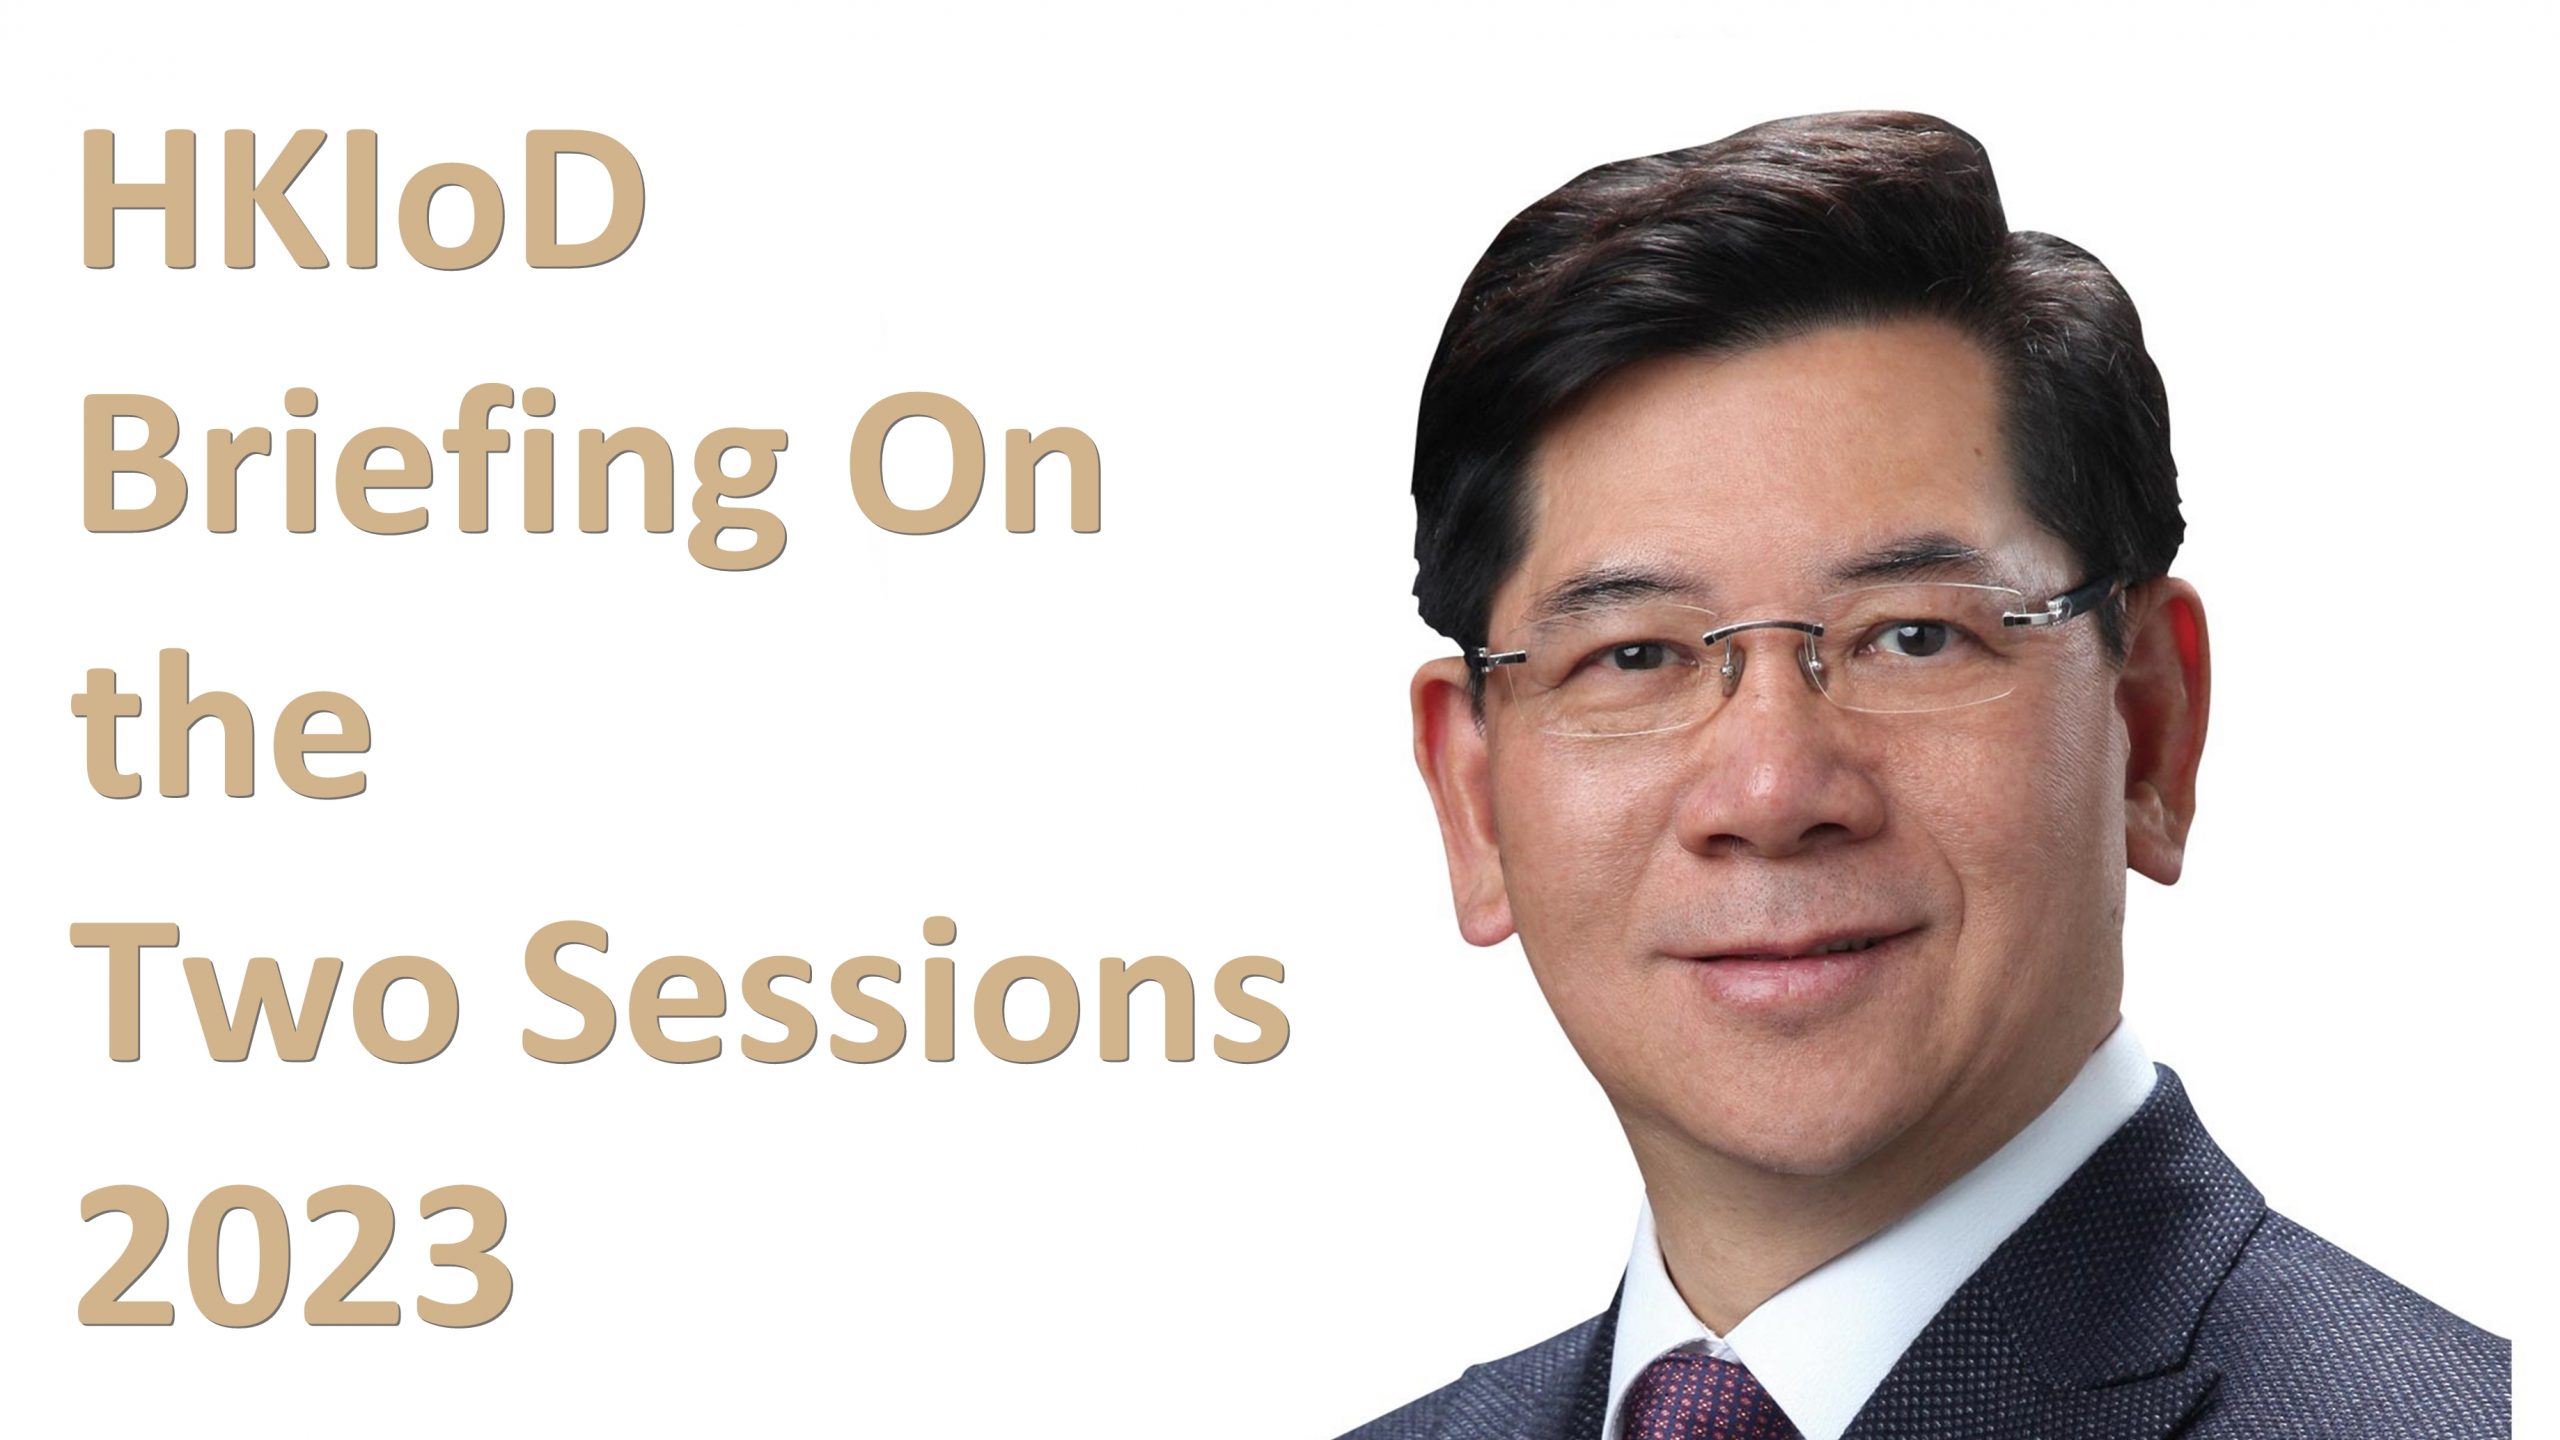 HKIoD Briefing On the Two Sessions 2023